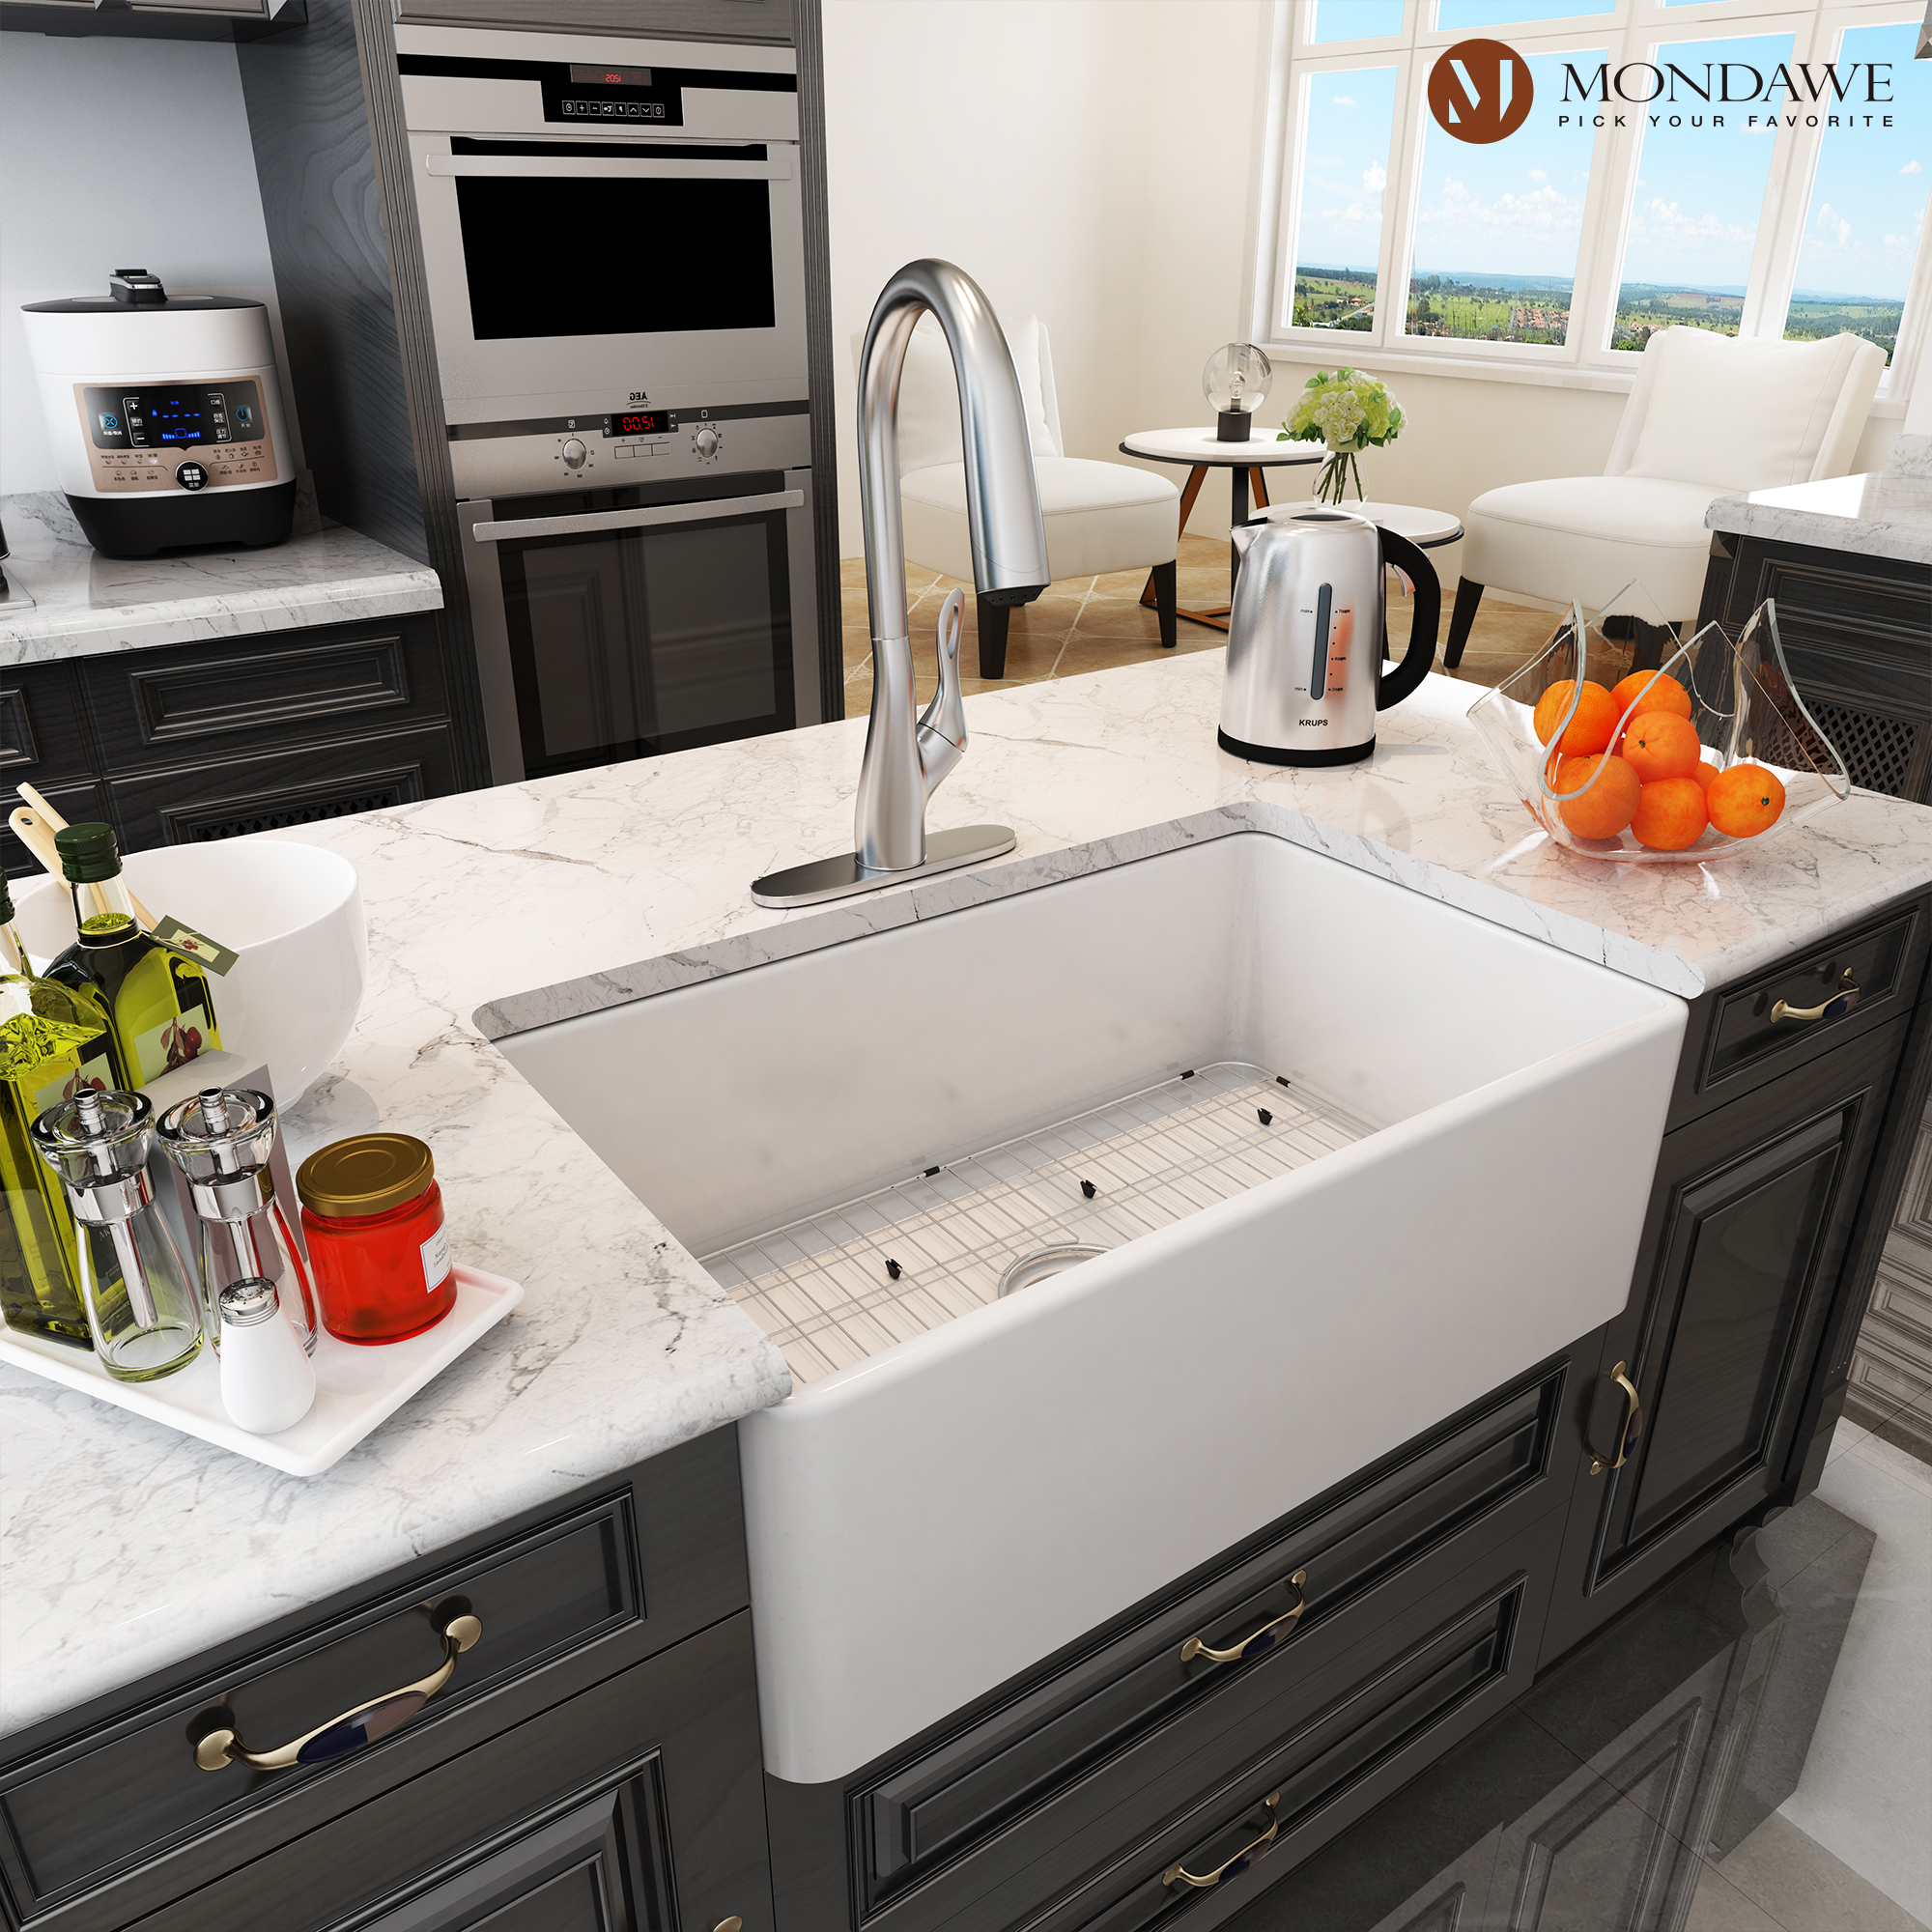 Farmhouse 30 In. Single Bowl Fireclay Kitchen Sink In White Comes With Pull Down Kitchen Faucet-Mondawe